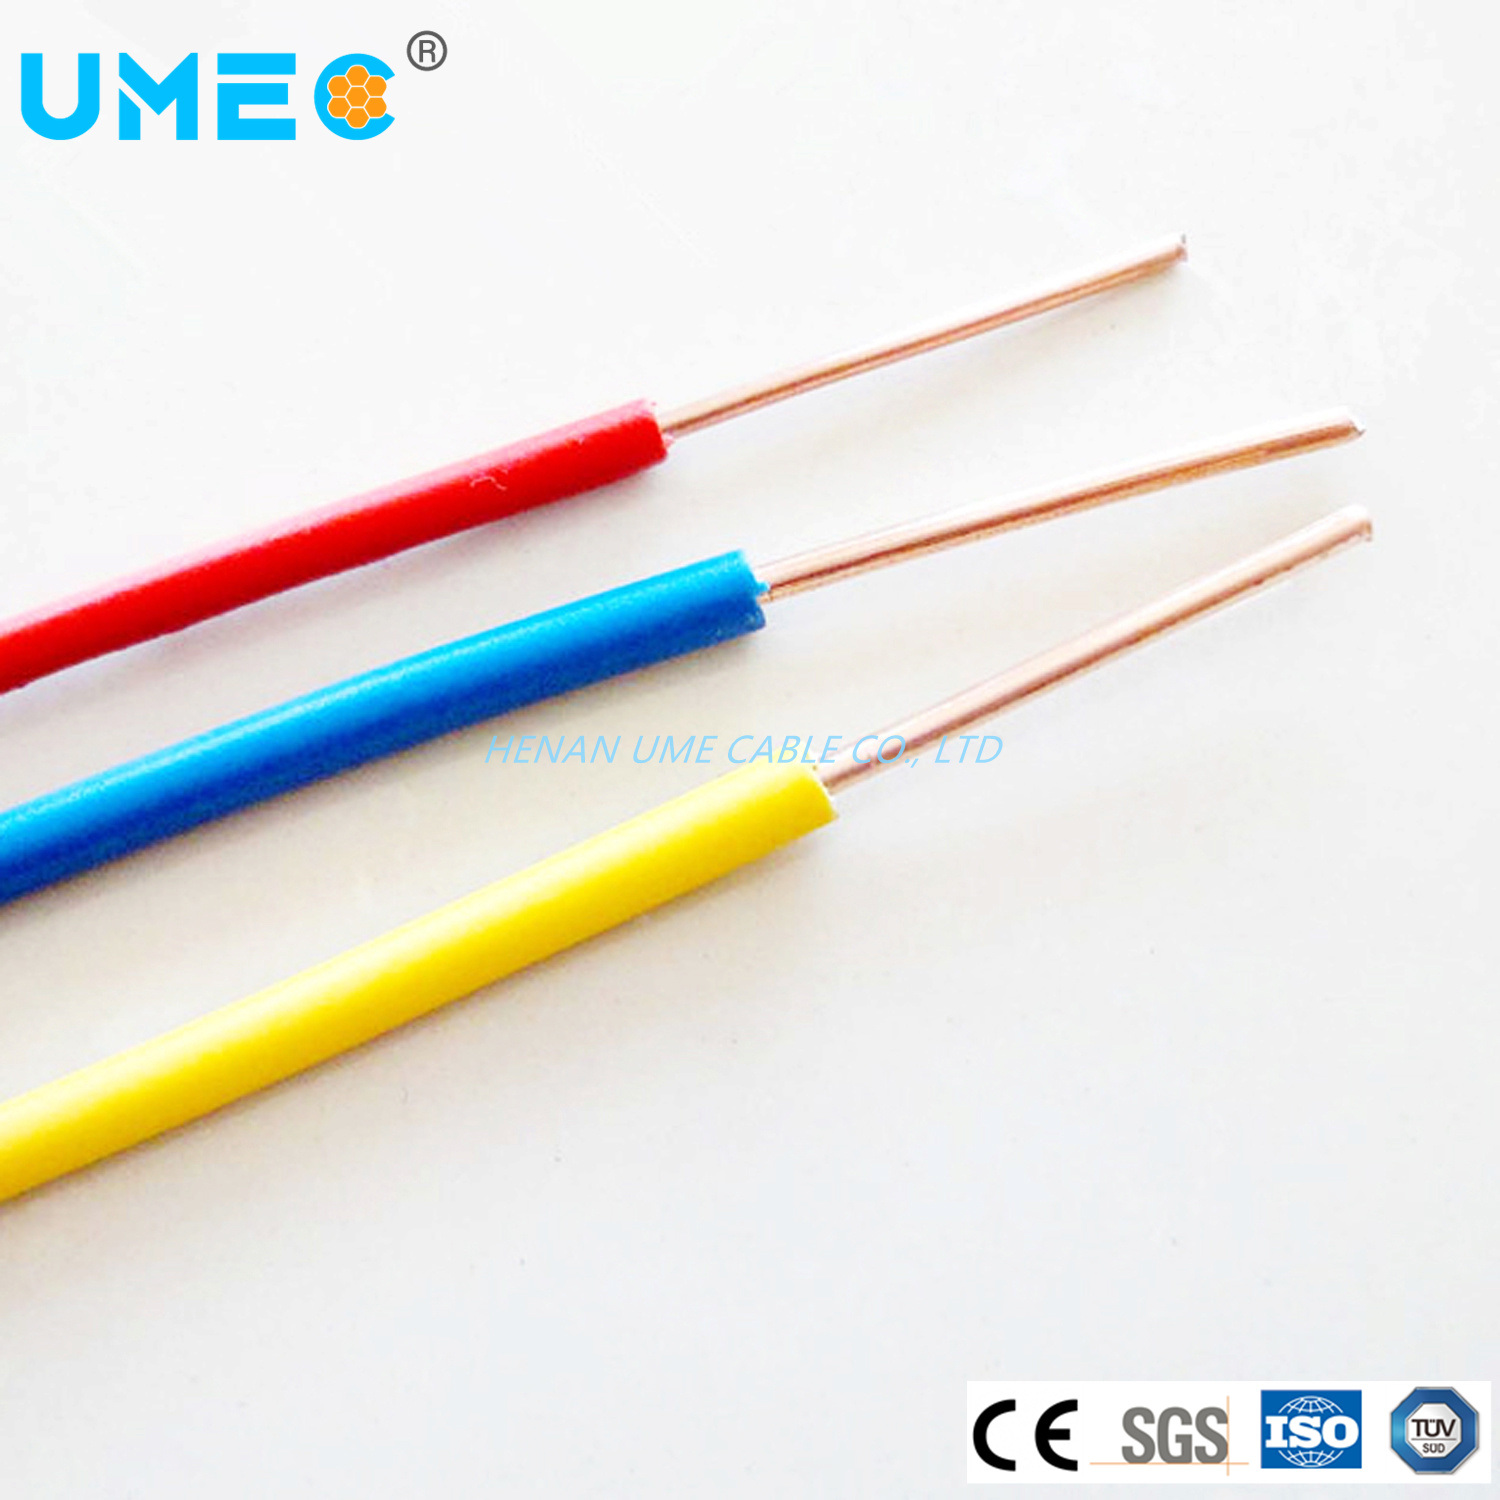 450/750V PVC Insulated Electrical Wire Cable H07V-U